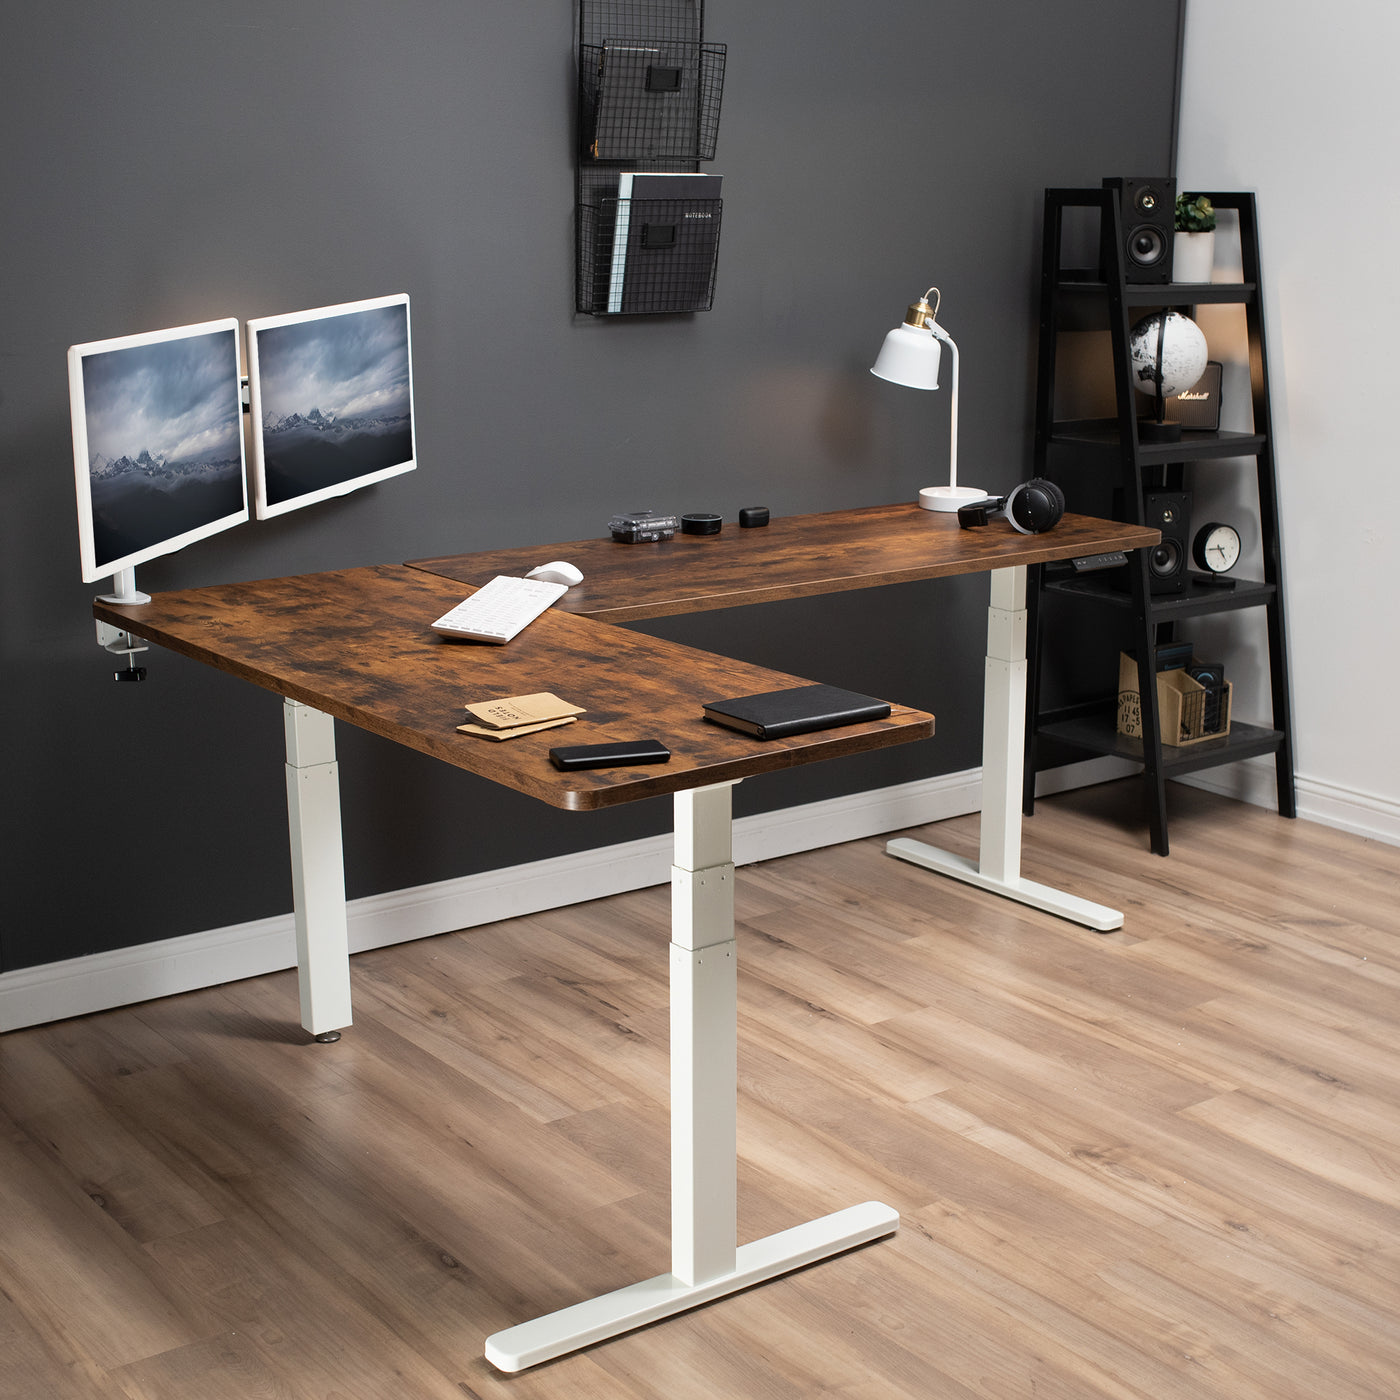 Rustic sturdy height adjustable corner desk workstation with memory controller.